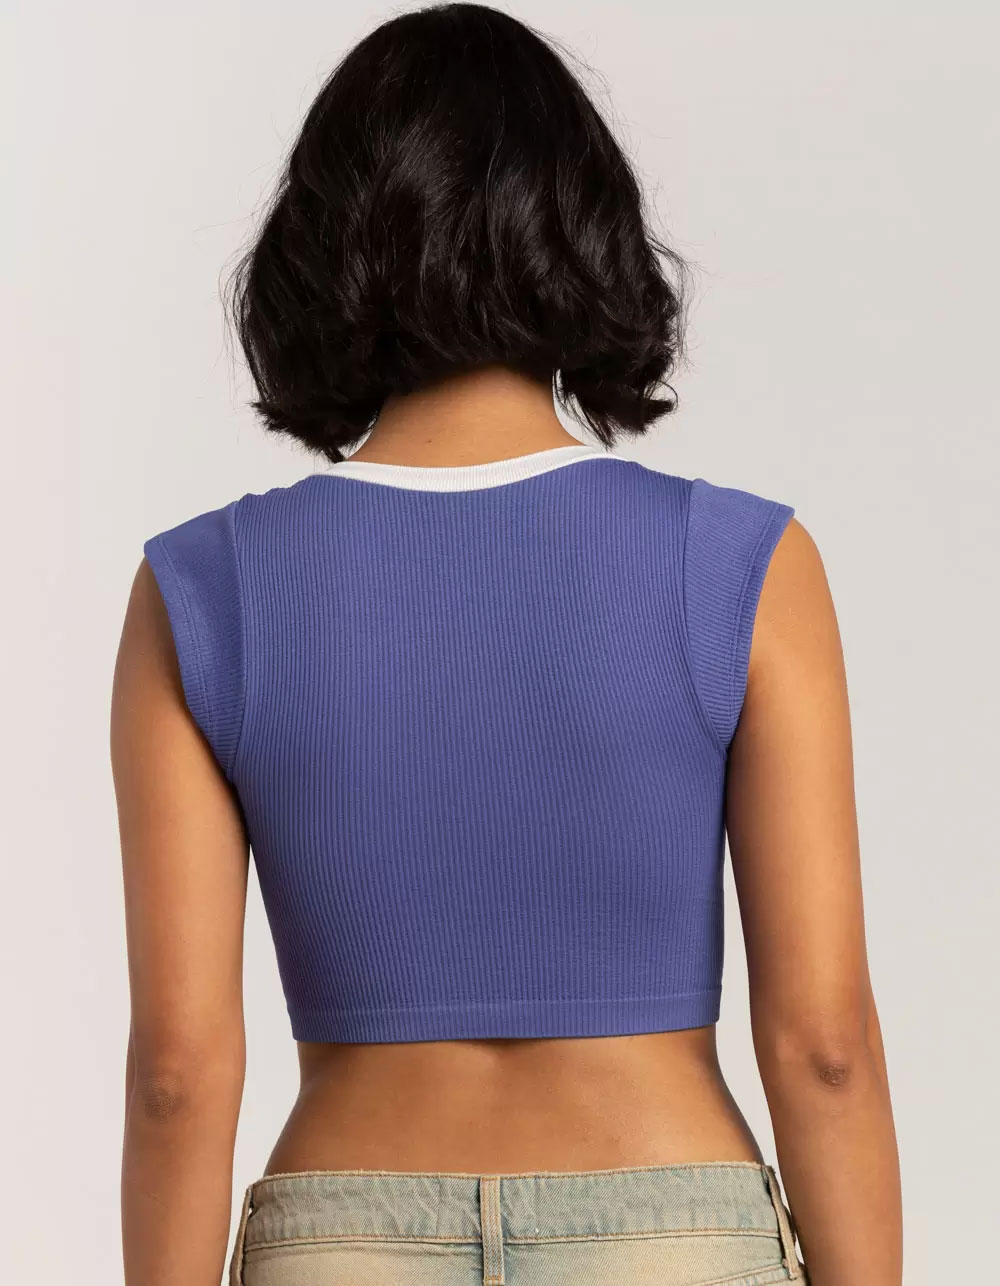 BDG Urban Outfitters Seamless Go For Gold Womens Crop Top - BLUE